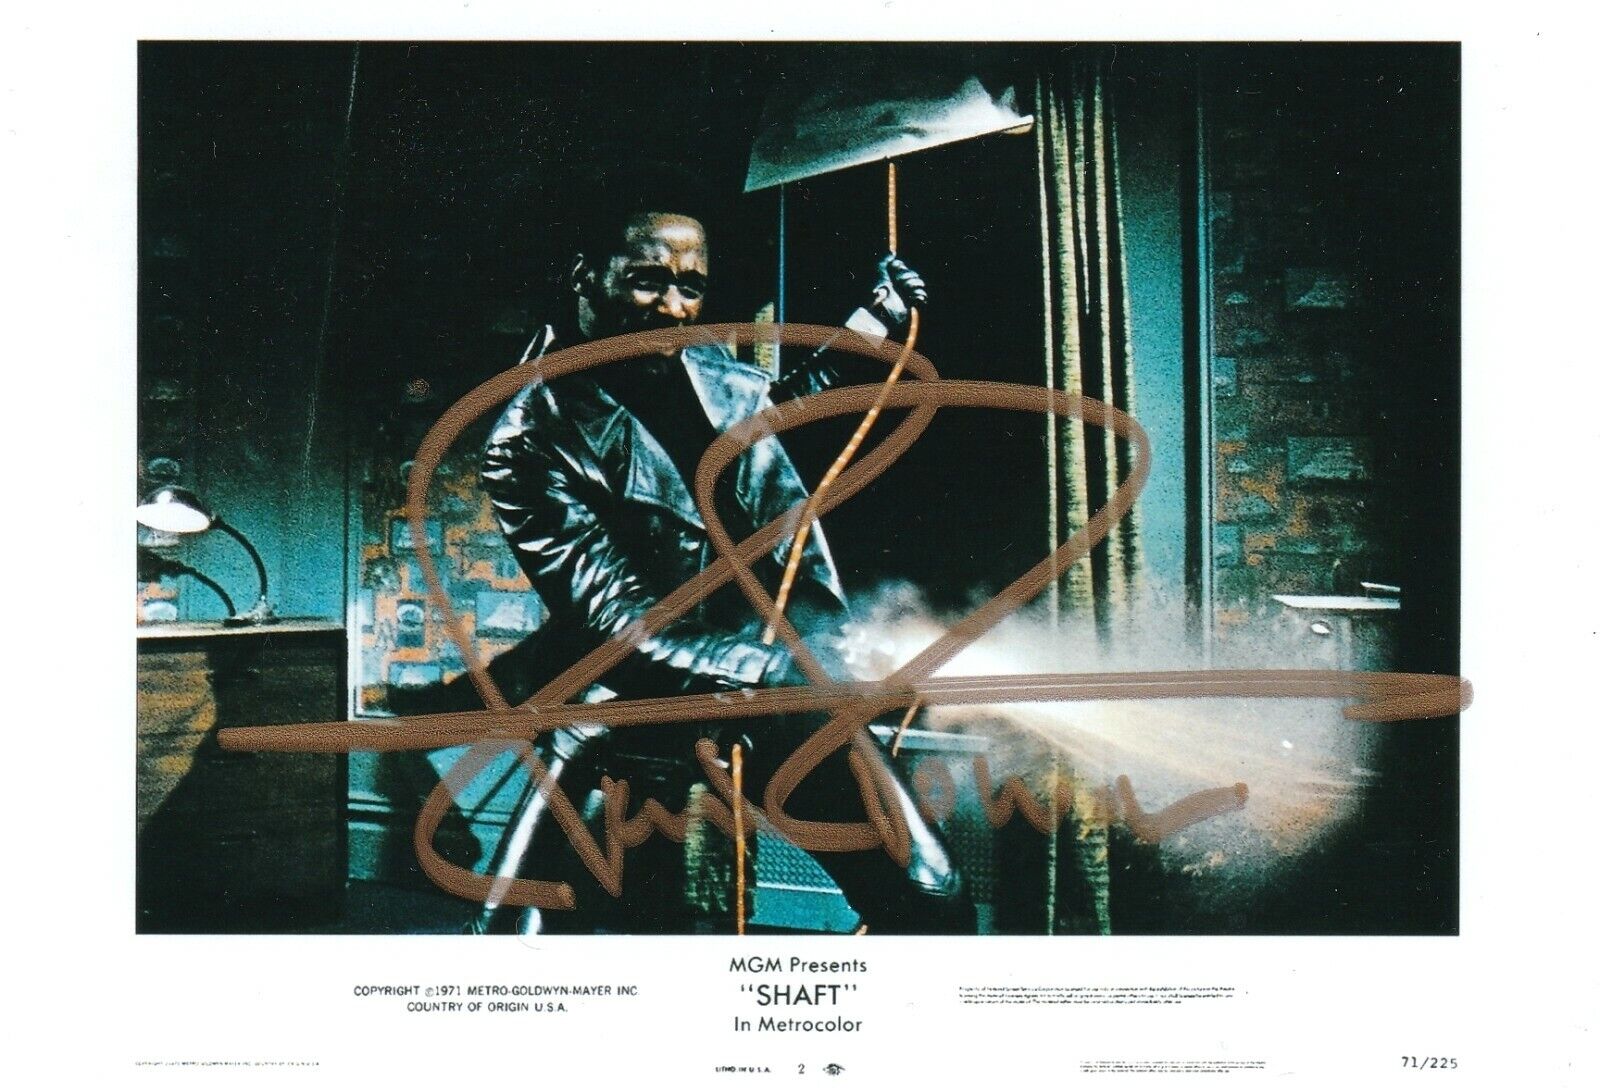 Richard Roundtree REAL hand SIGNED 4x6 Shaft Movie Photo Poster painting #1 COA Autographed